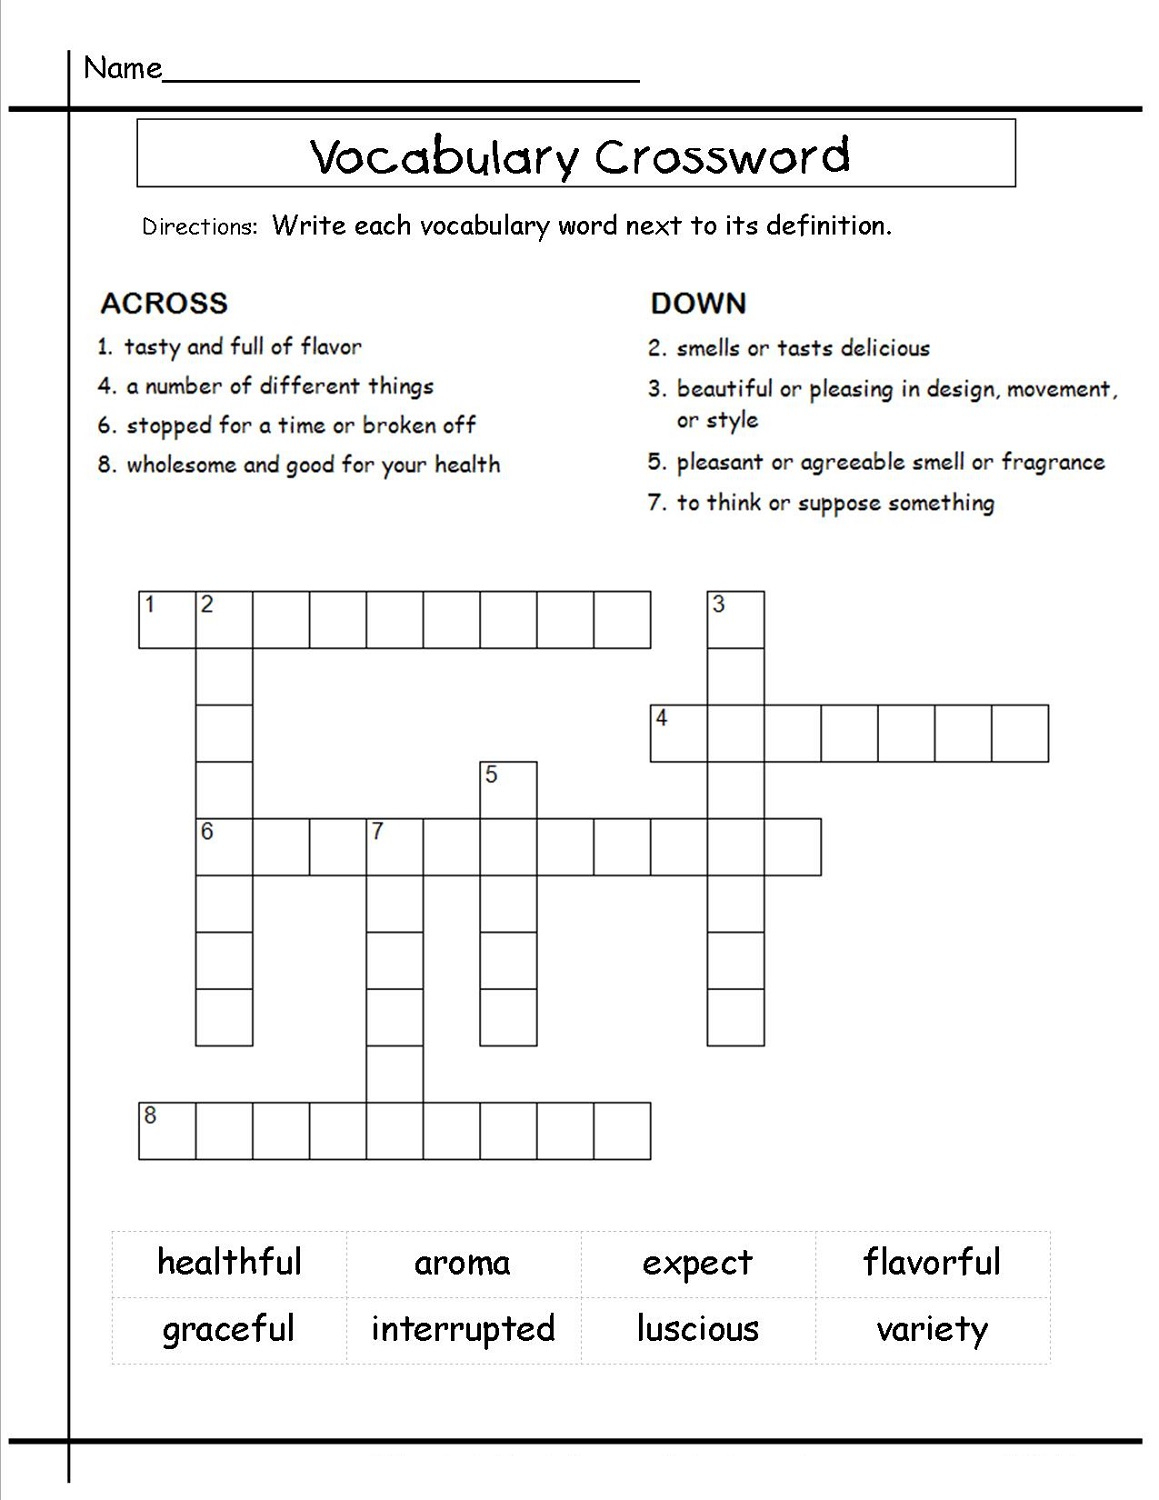 Crossword Puzzles For 5Th Graders | Activity Shelter - 5Th Grade Crossword Puzzles Printable